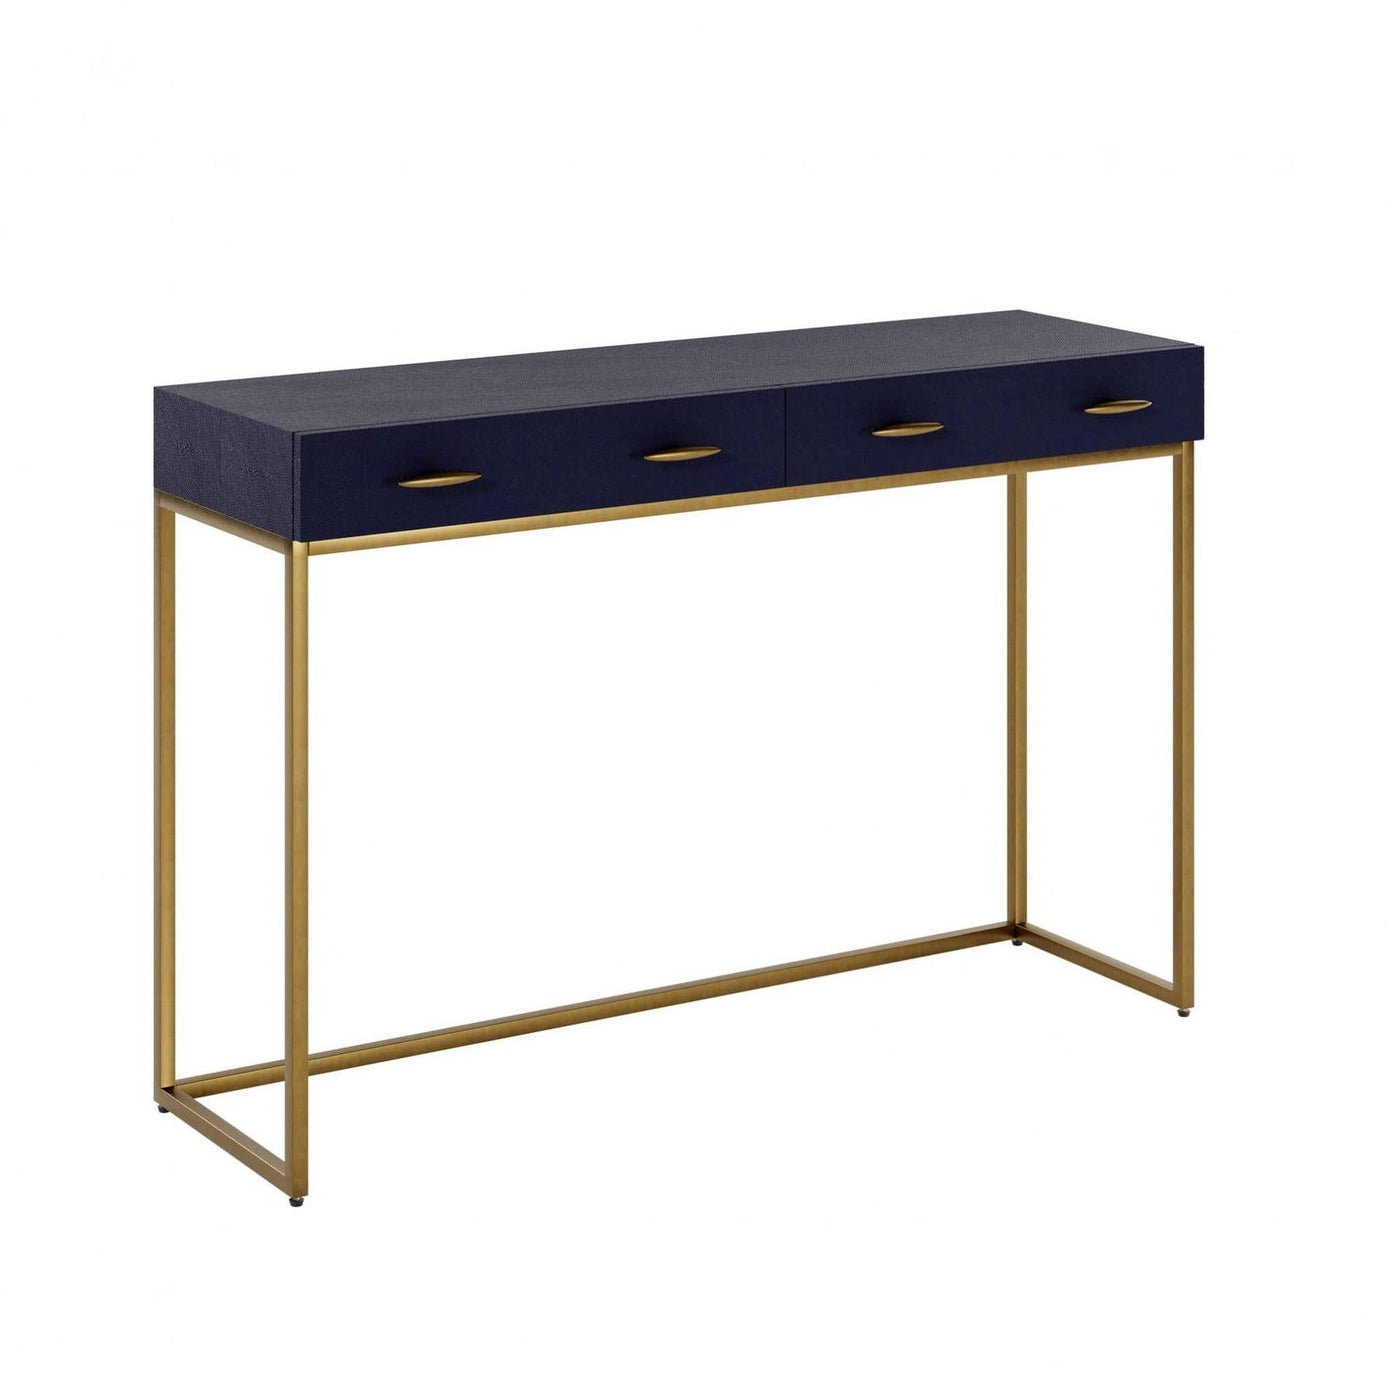 Willersley Console by DI Designs-Esme Furnishings